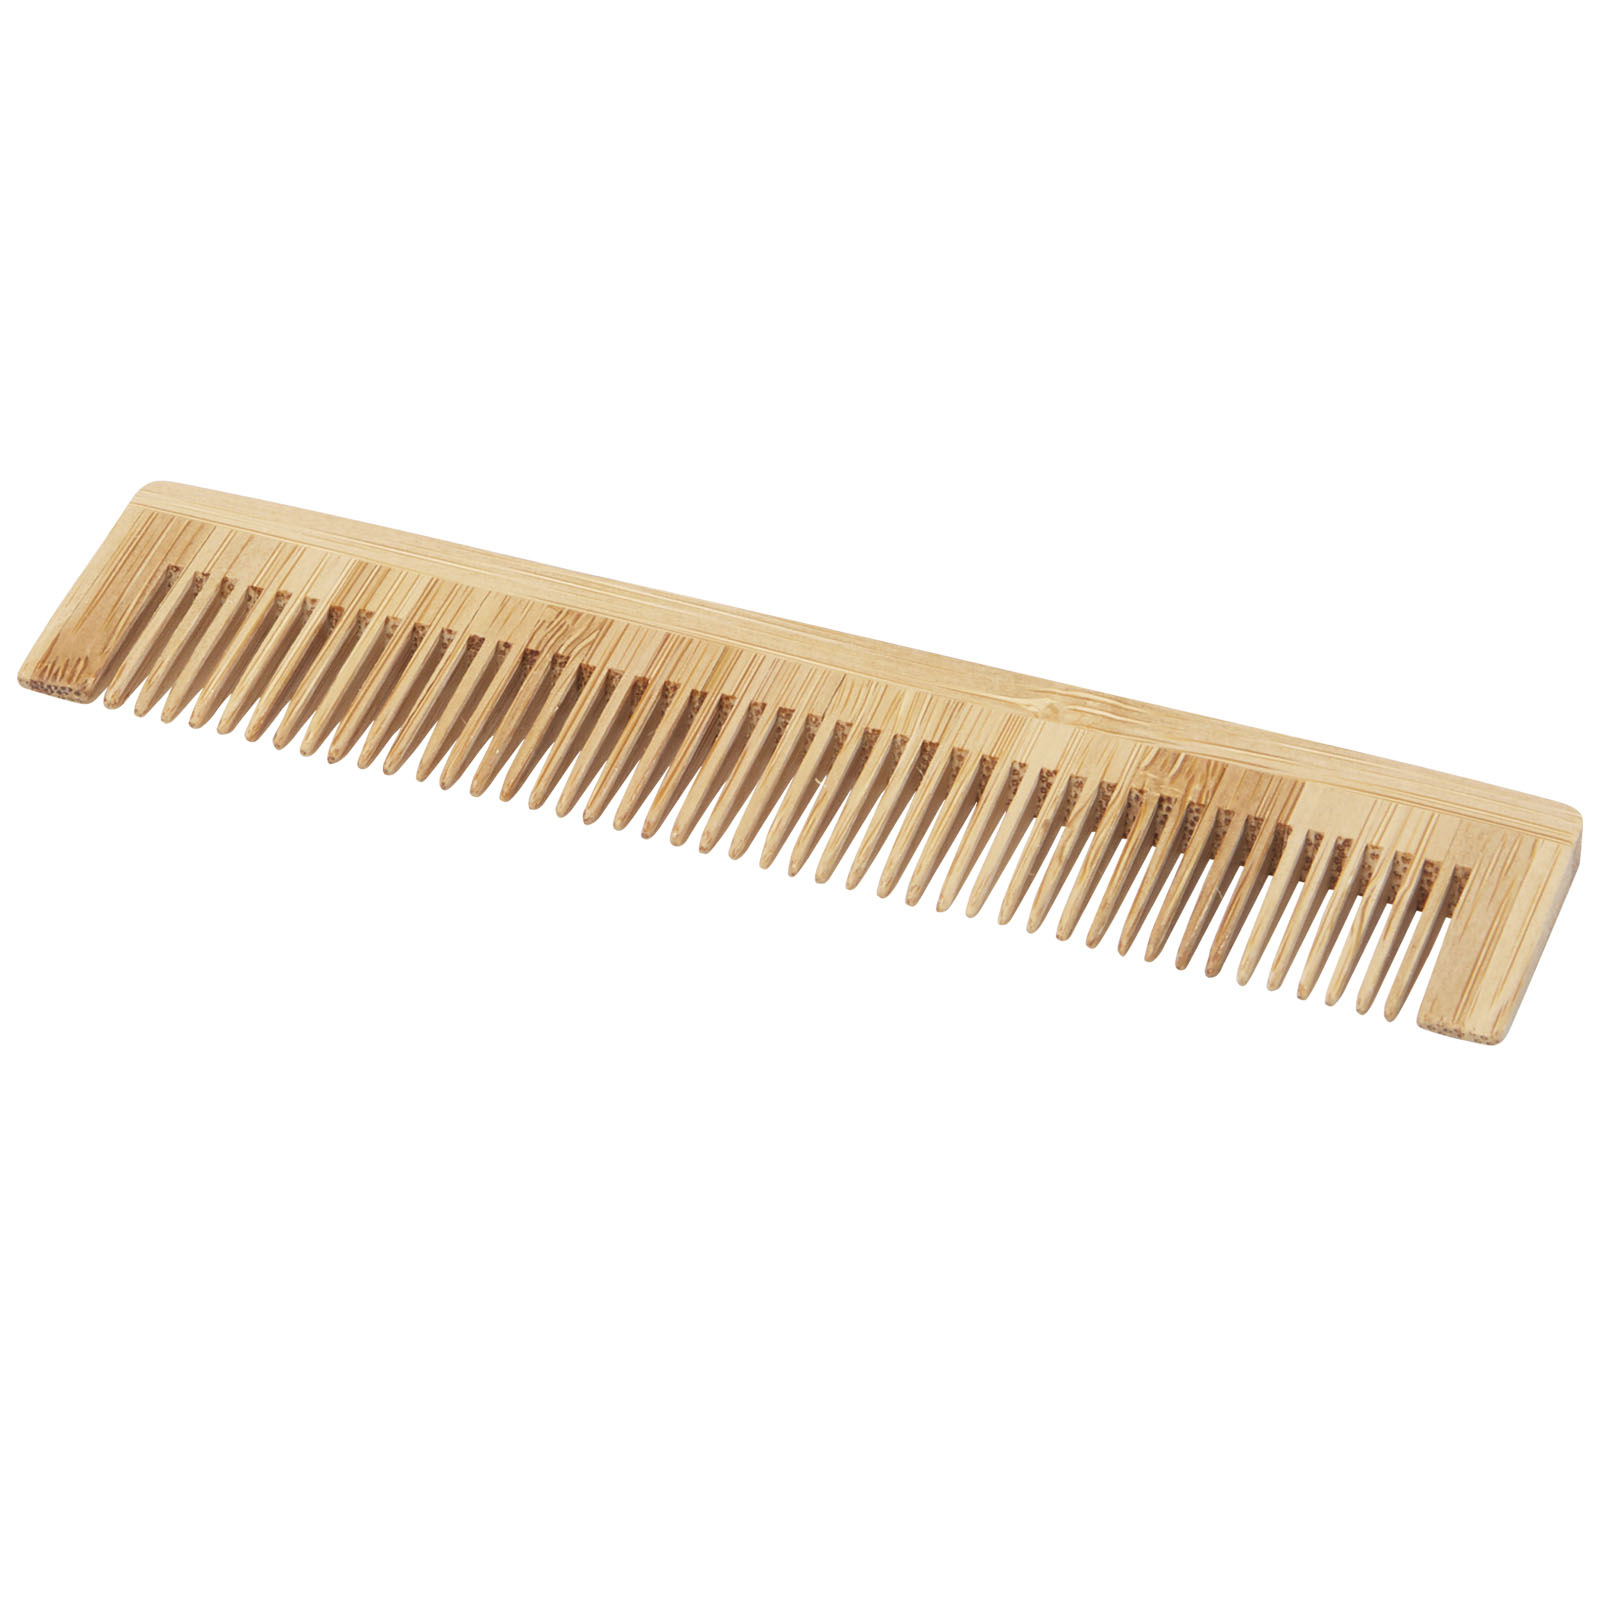 Health & Personal Care - Hesty bamboo comb